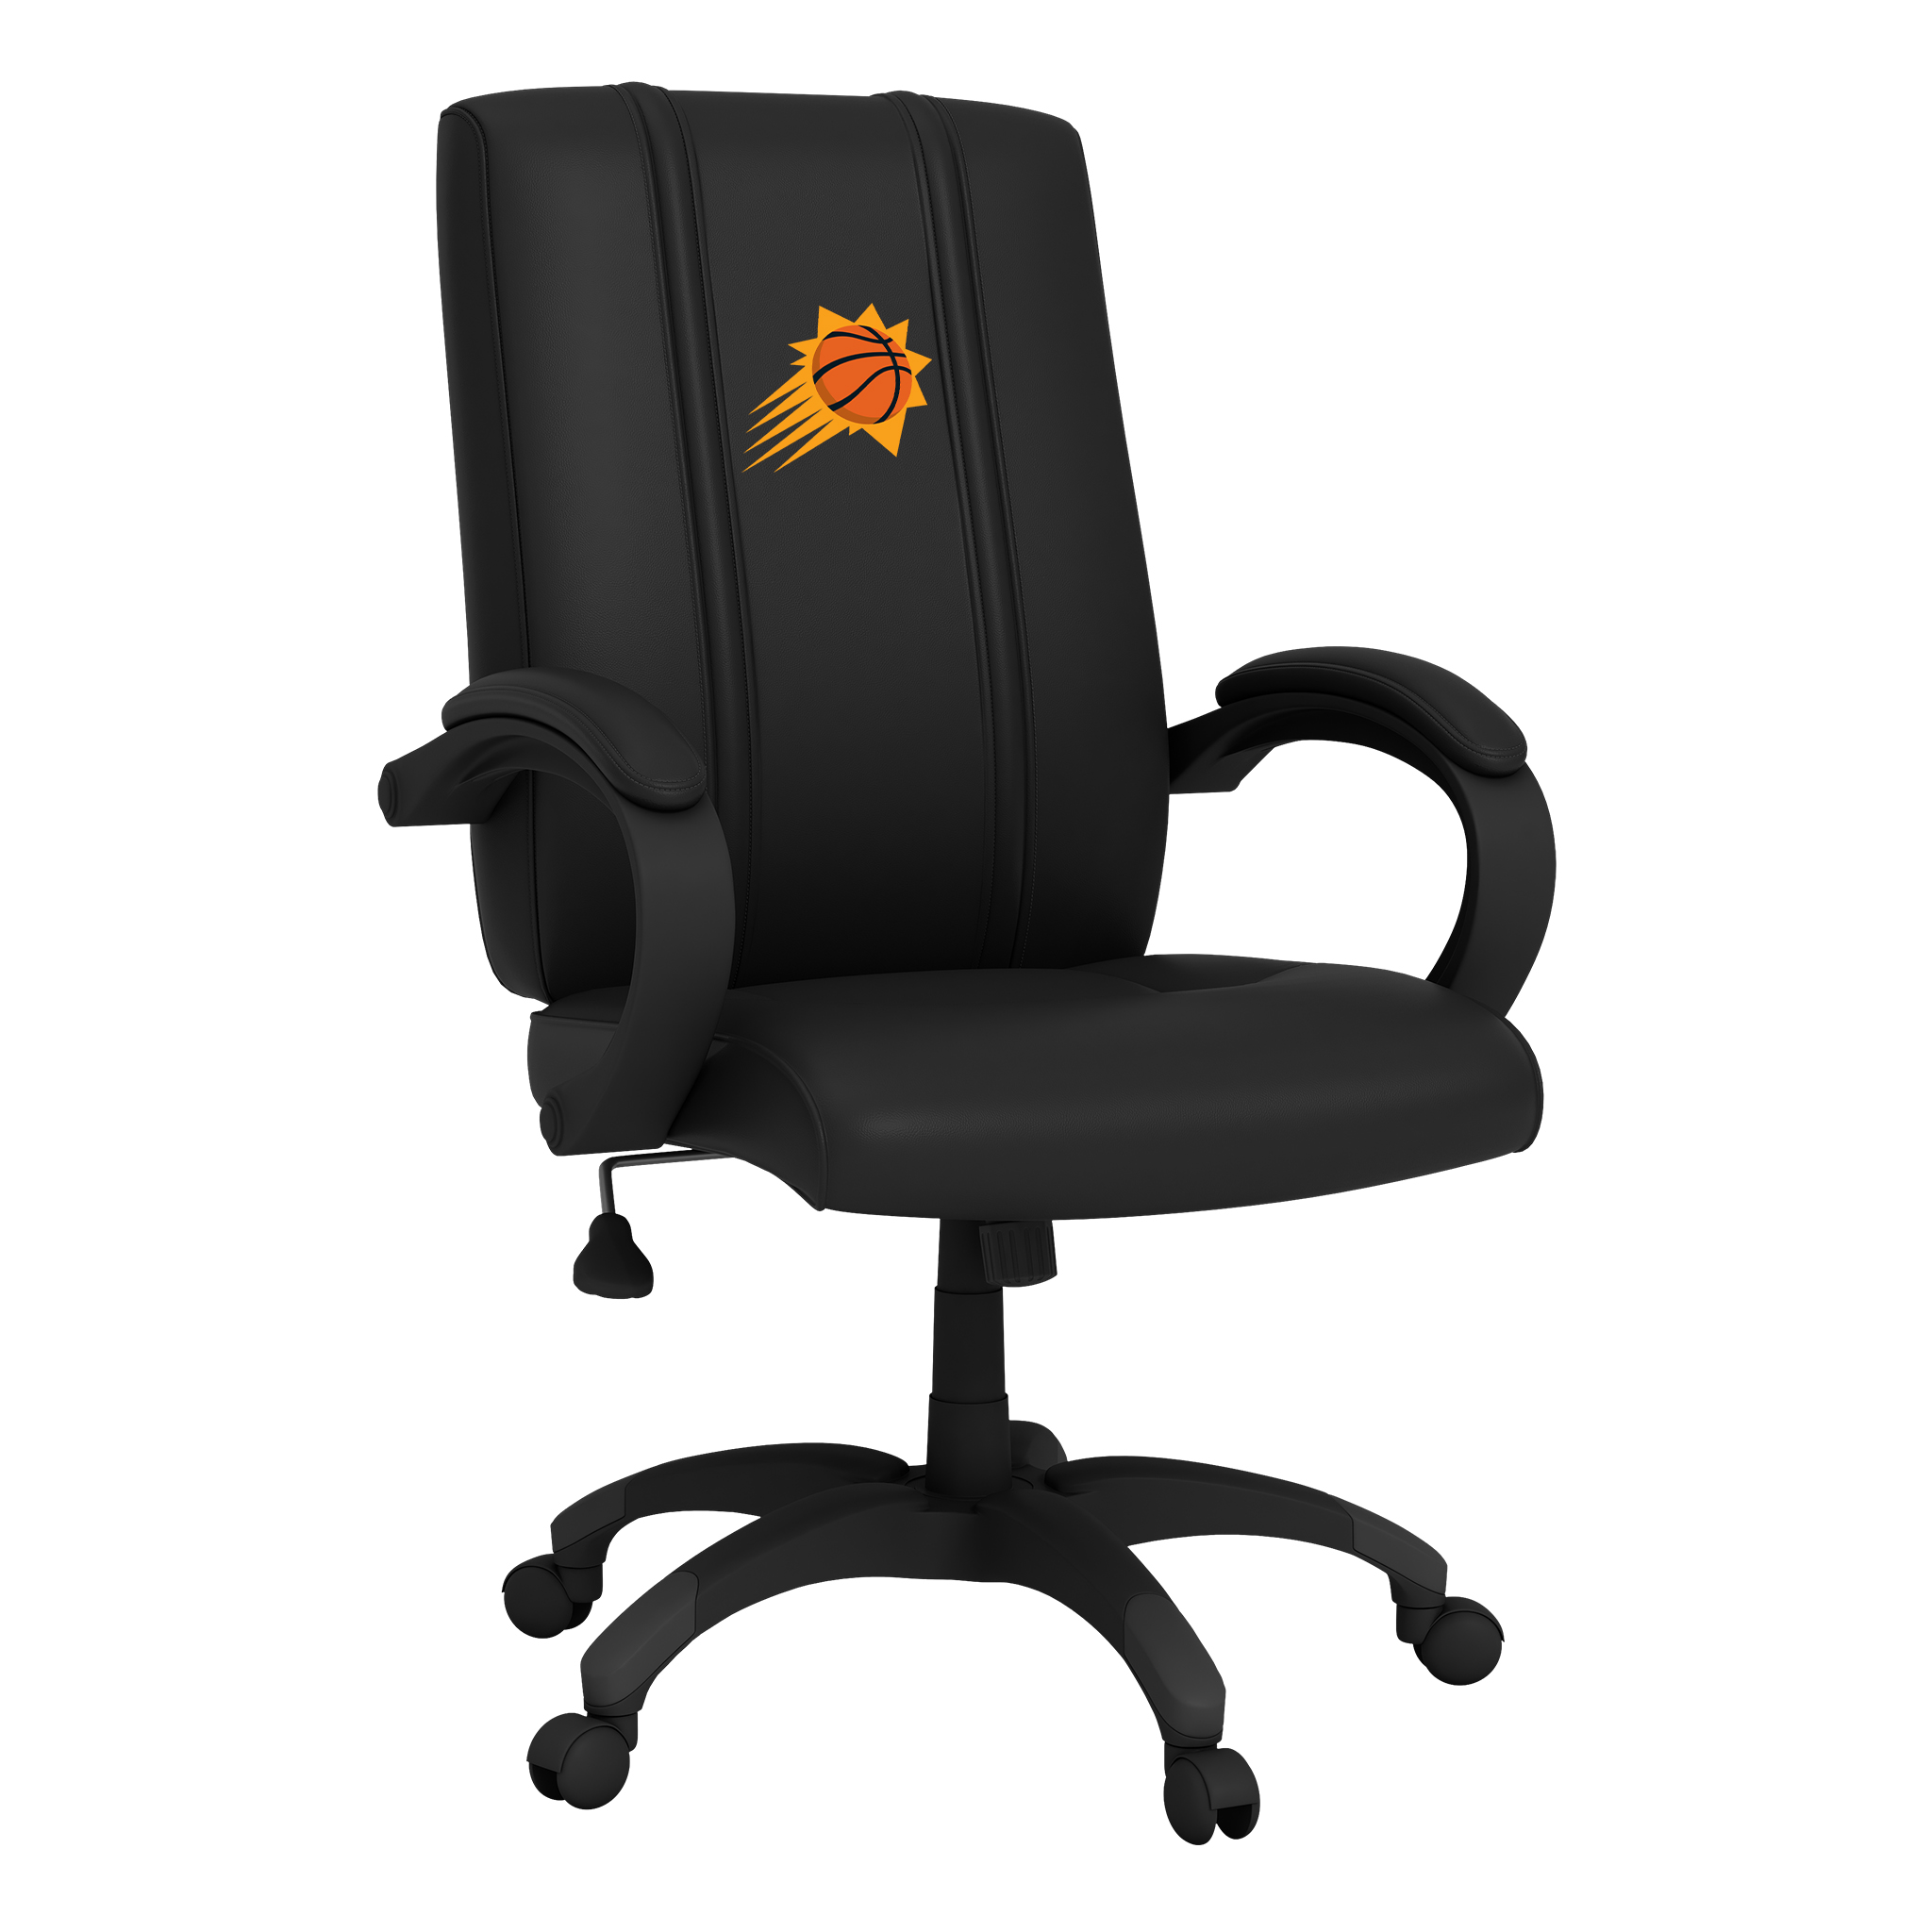 Phoenix Suns Office Chair 1000 with Phoenix Suns Primary